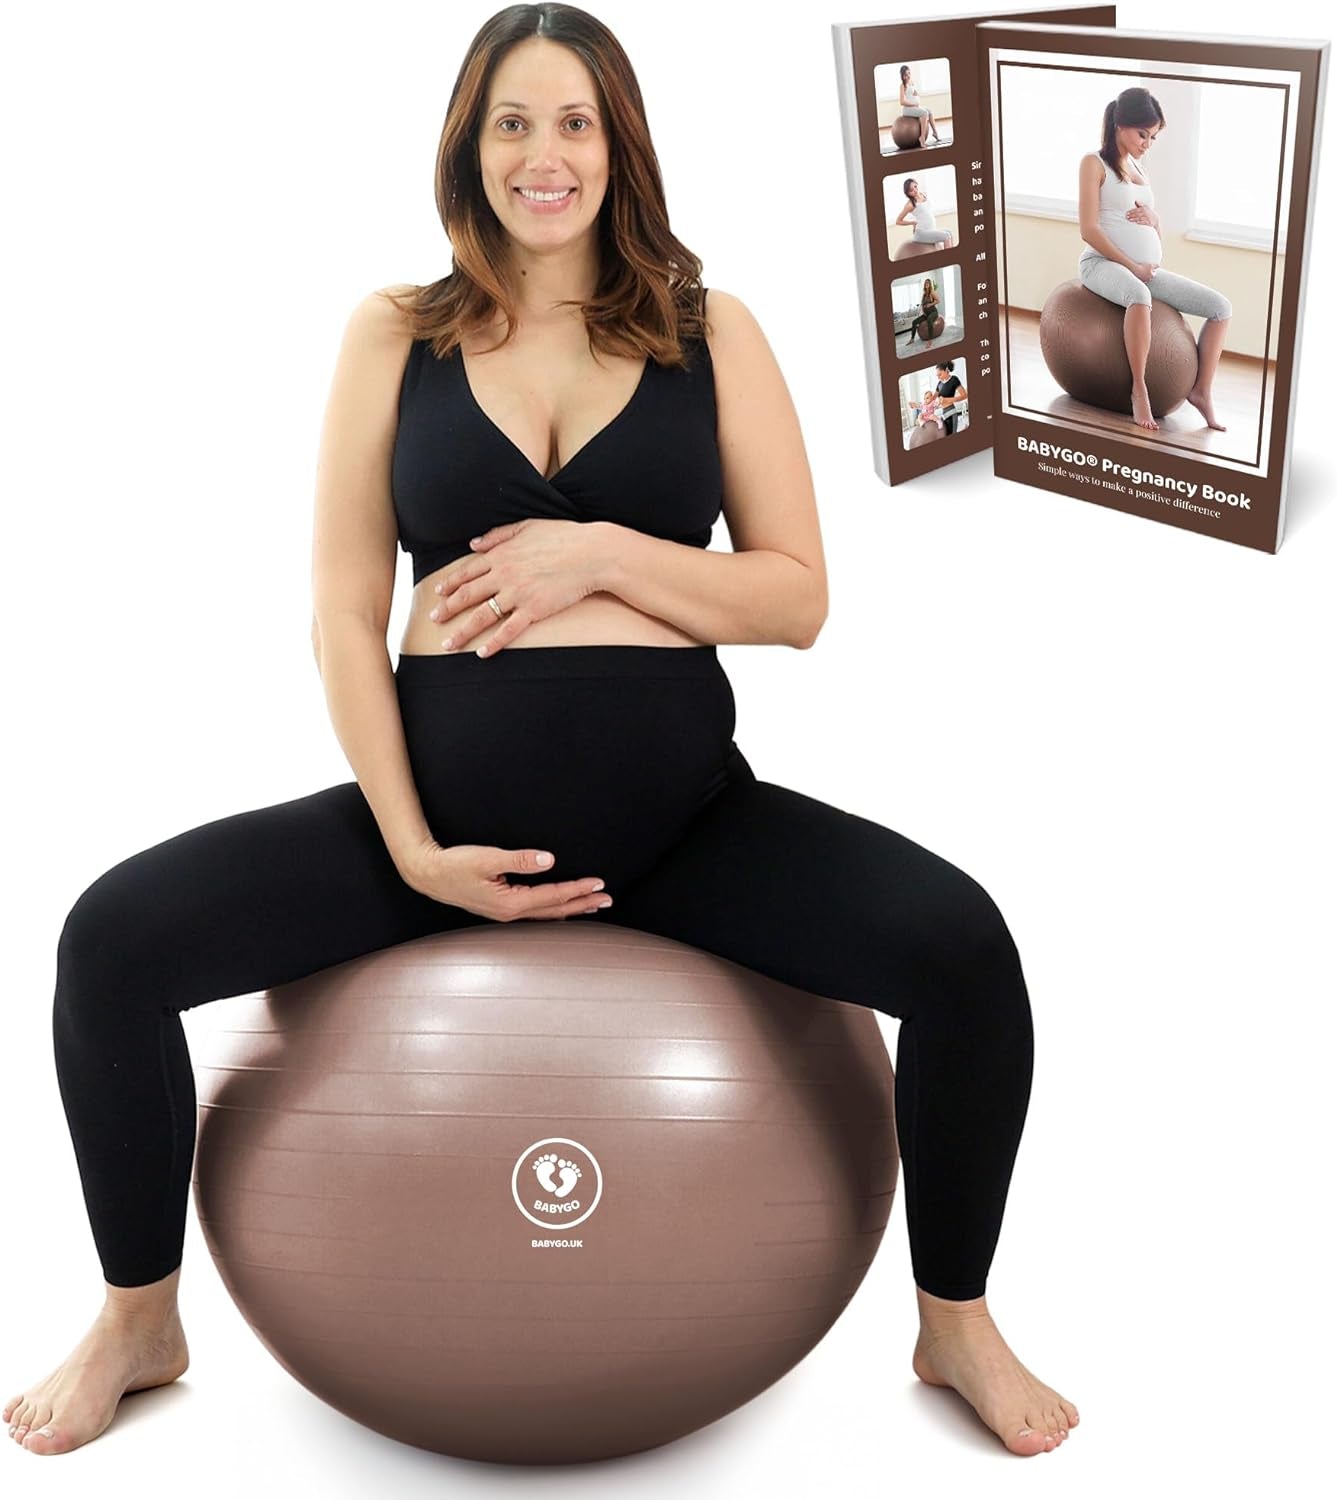 Birthing Ball - Pregnancy Yoga Labor & Exercise Ball & Book Set Trimester Targeting, Maternity Physio, Birth & Recovery Plan Included anti Burst Eco Friendly